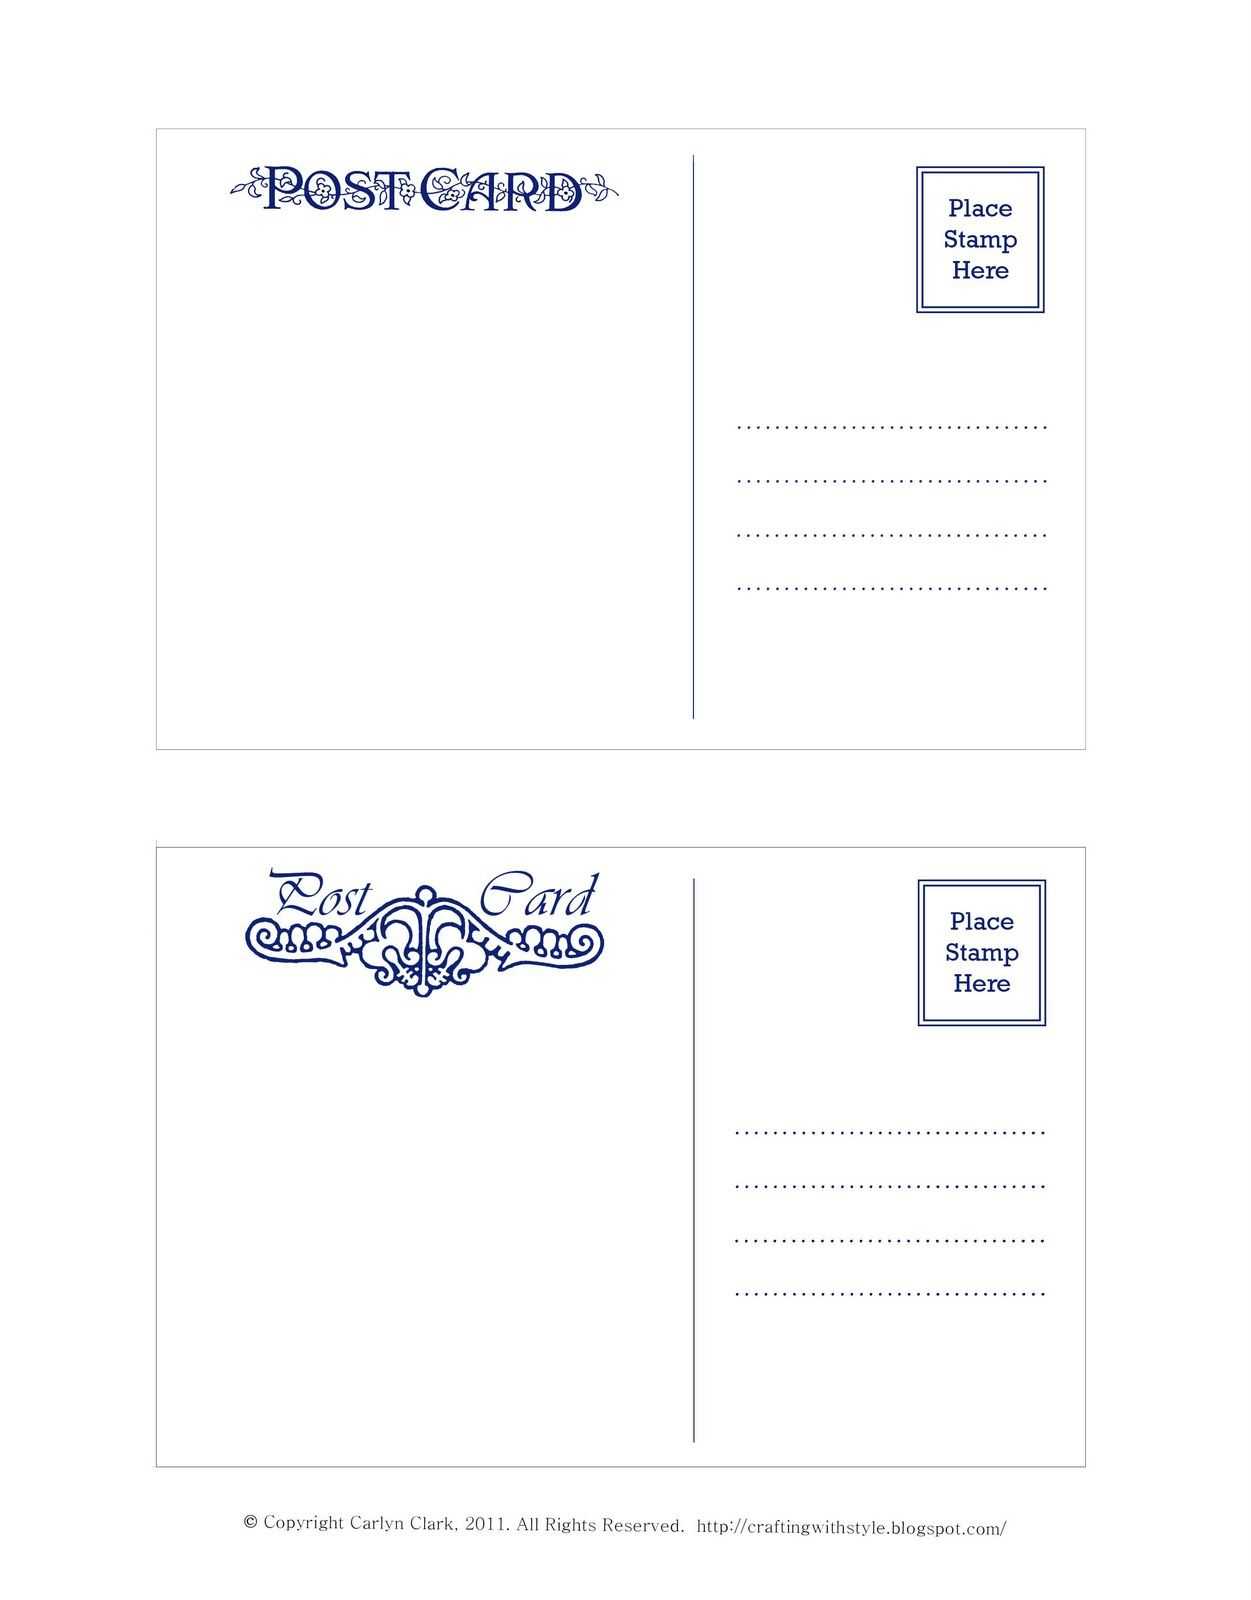 Crafting With Style: Free Postcard Templates | Free In Post Cards Template